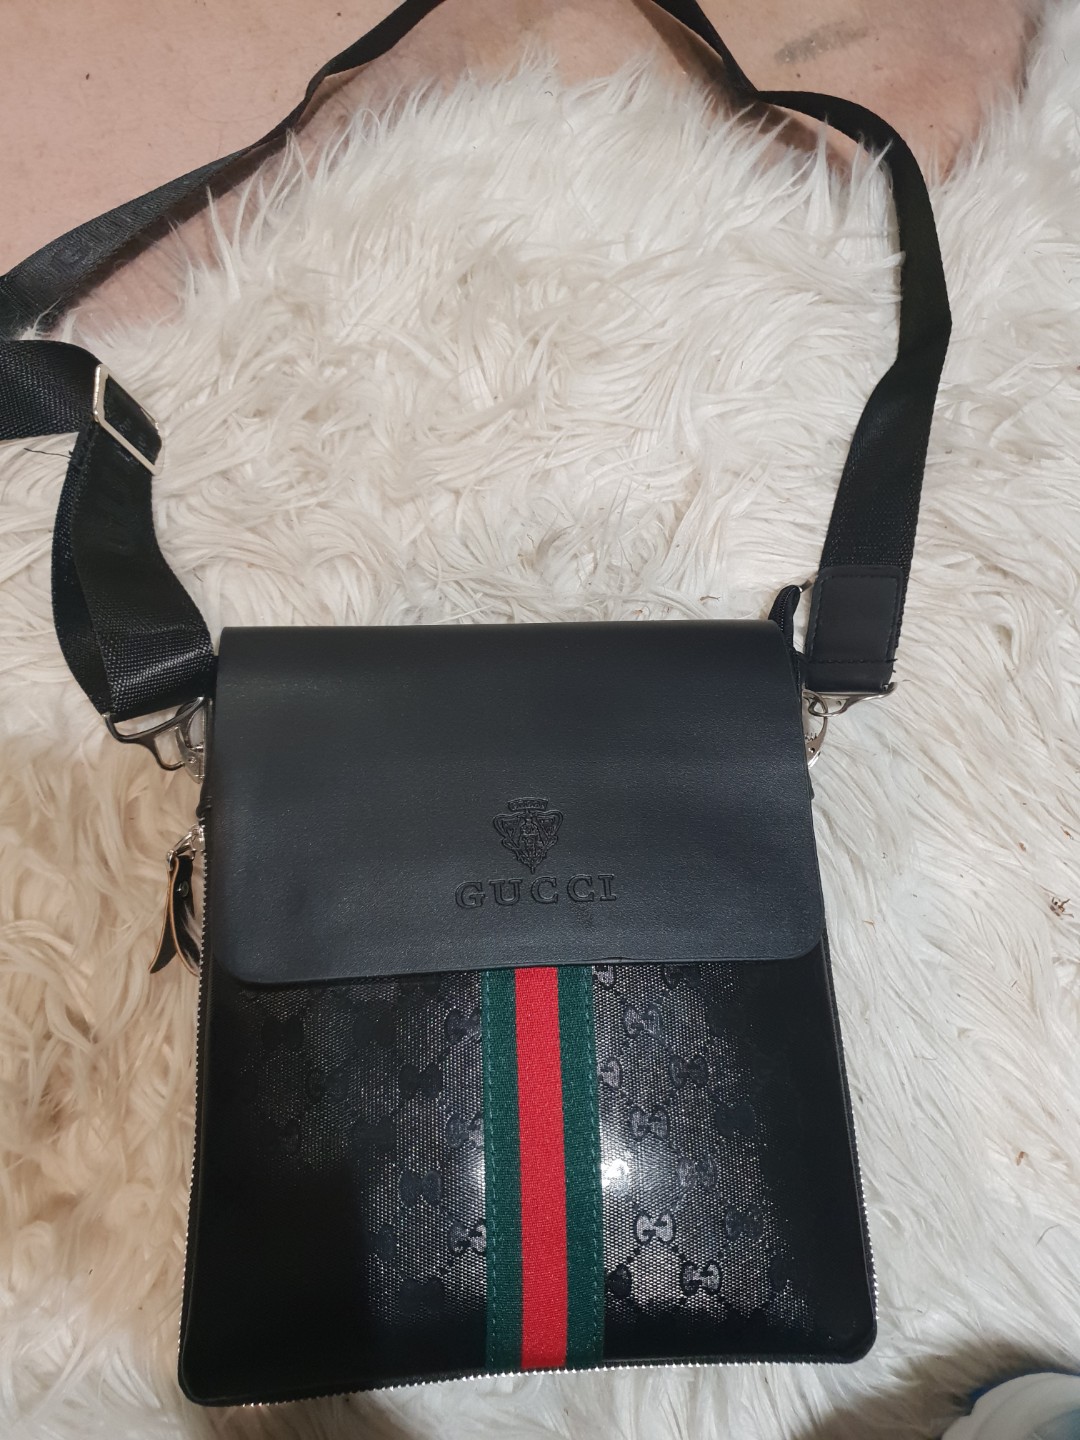 Gucci Side Bag Price In South Africa | Confederated Tribes of the Umatilla Indian Reservation